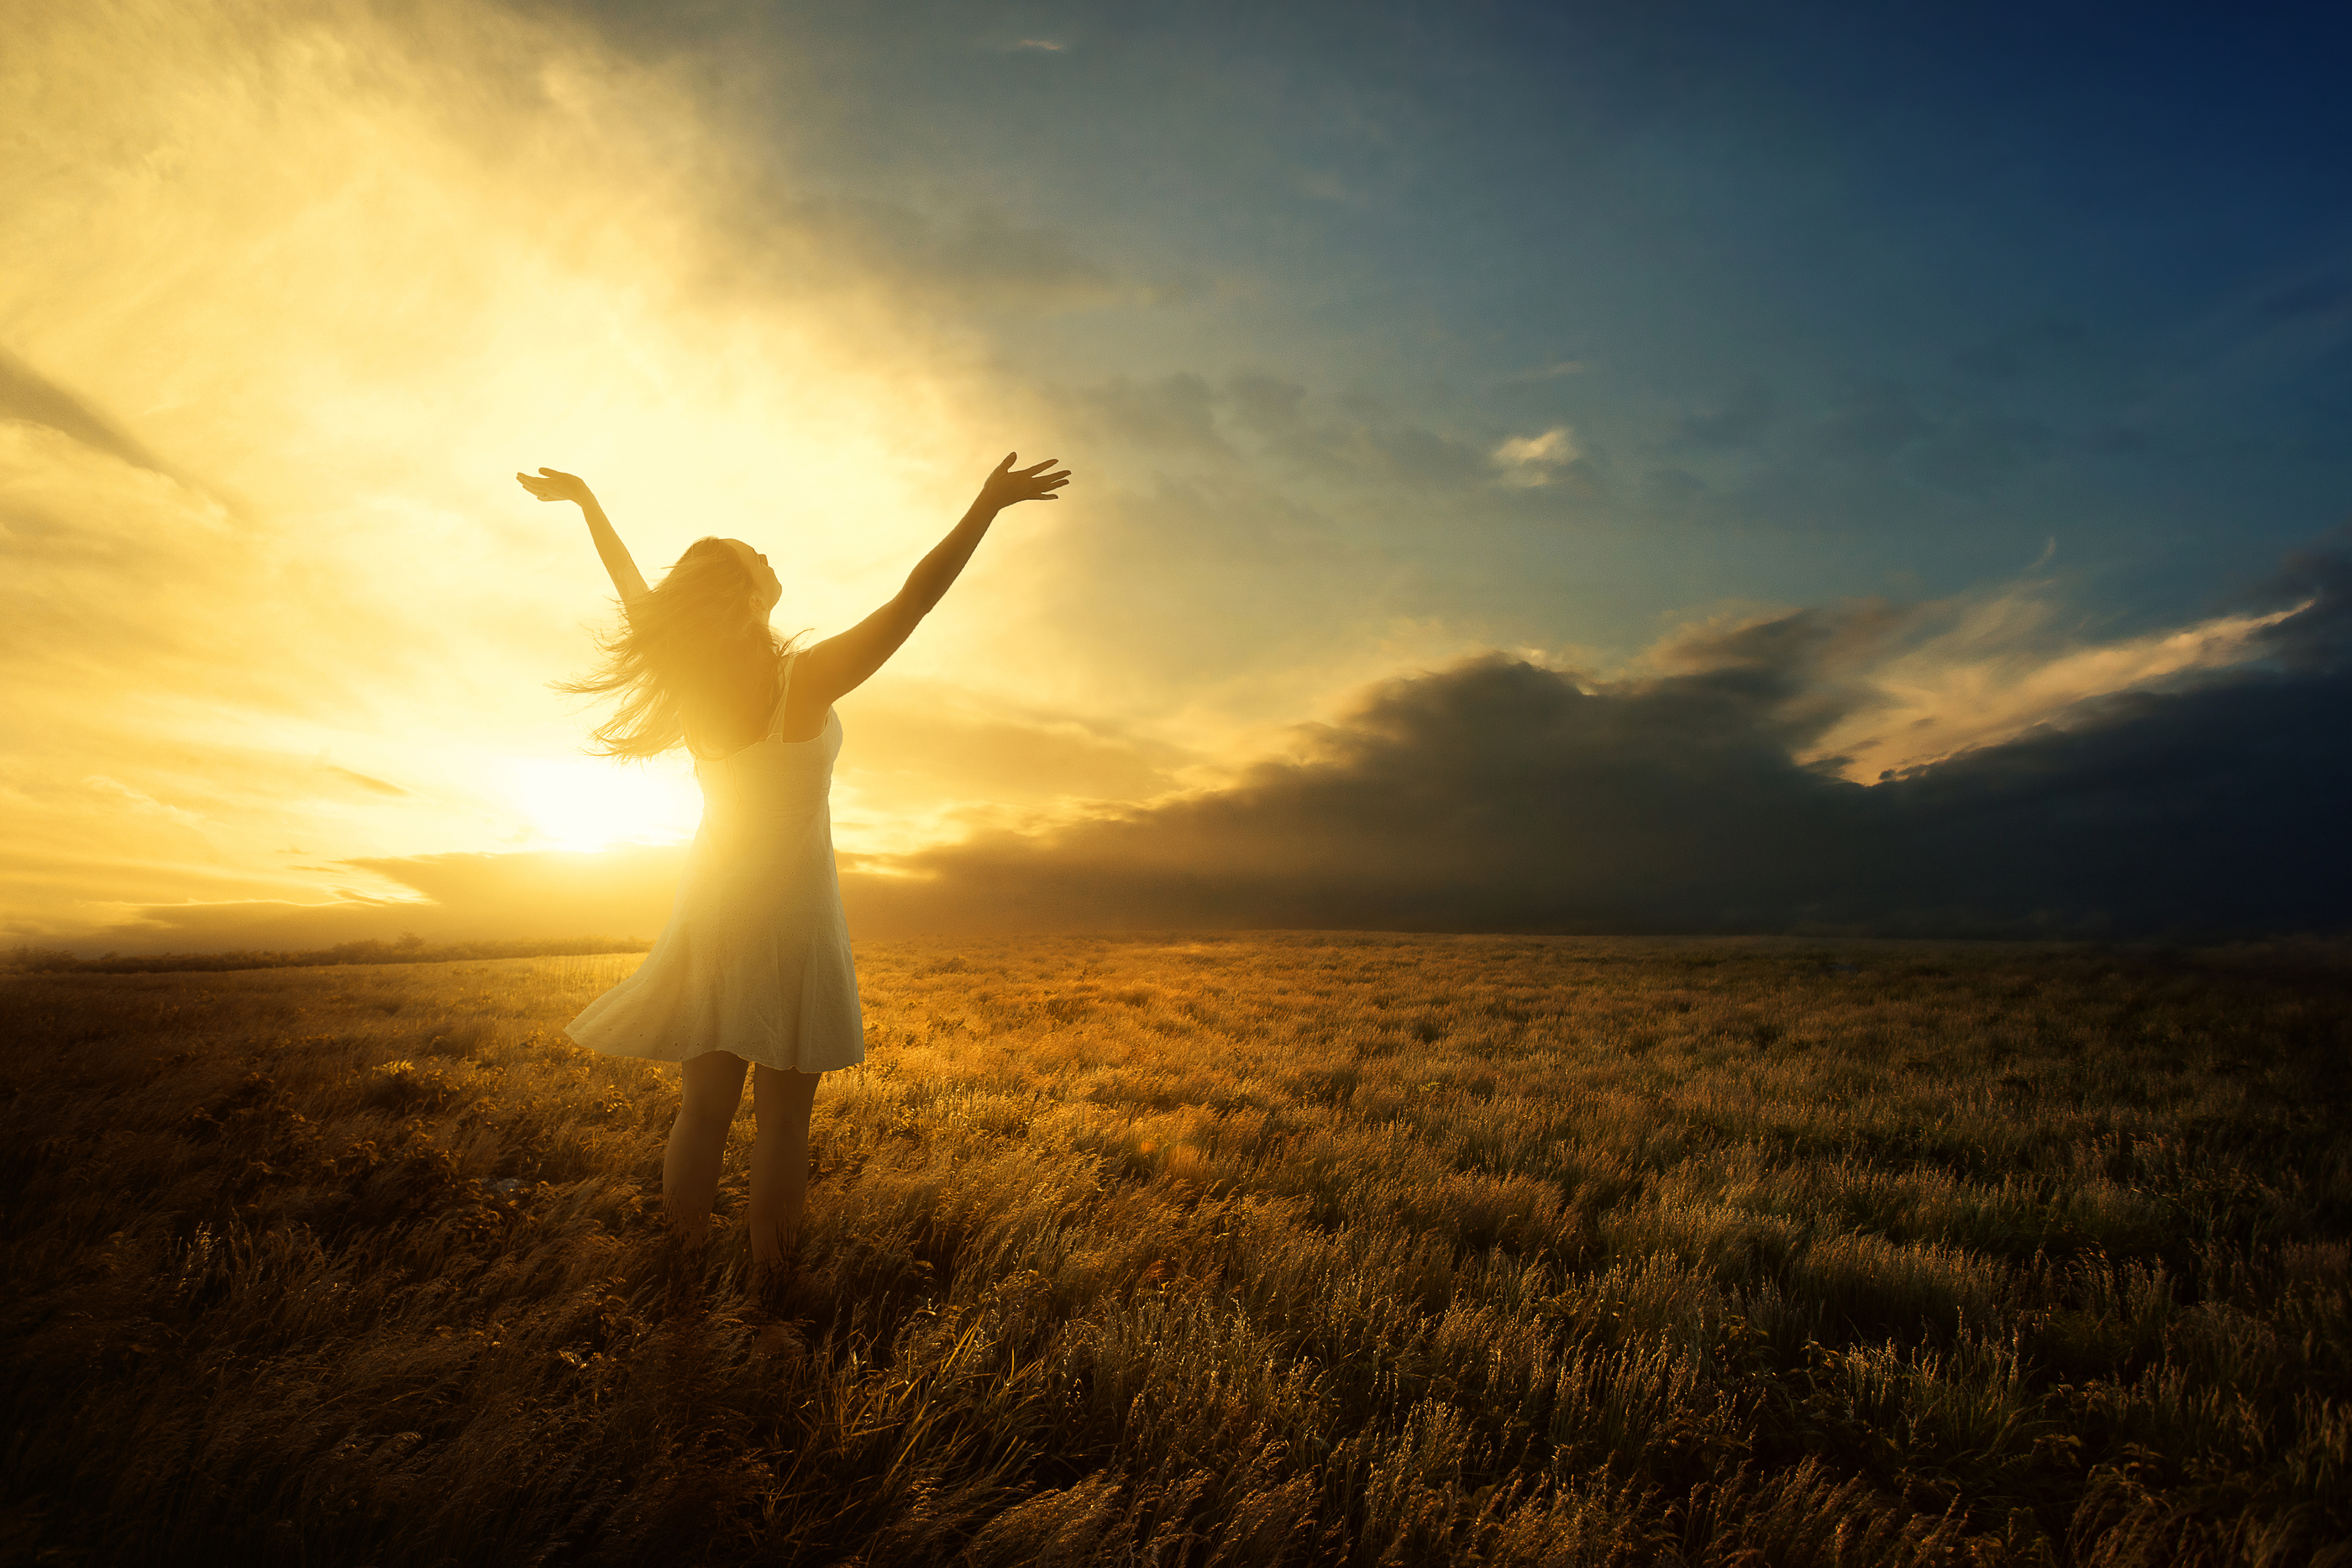 A woman lifts her arms in praise at sunset